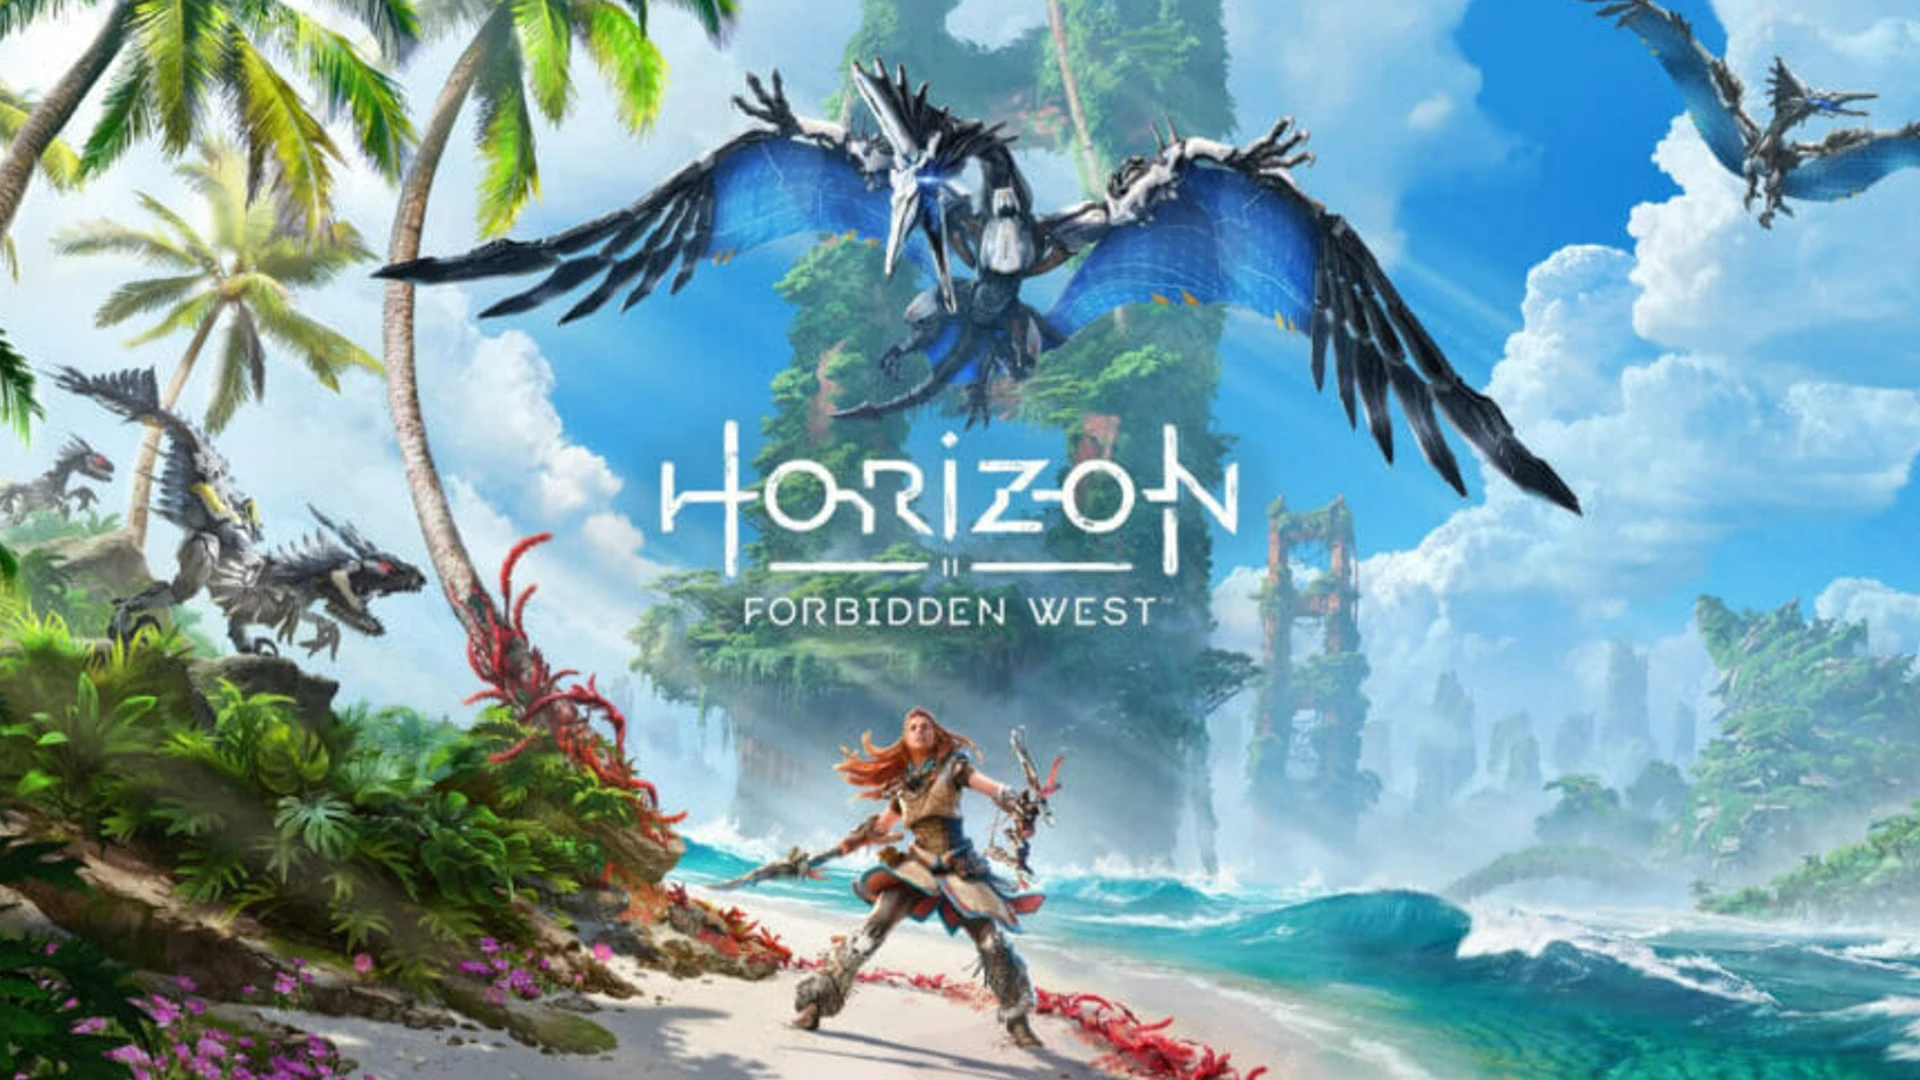 Horizon Forbidden West main screen and map leaked days before release.